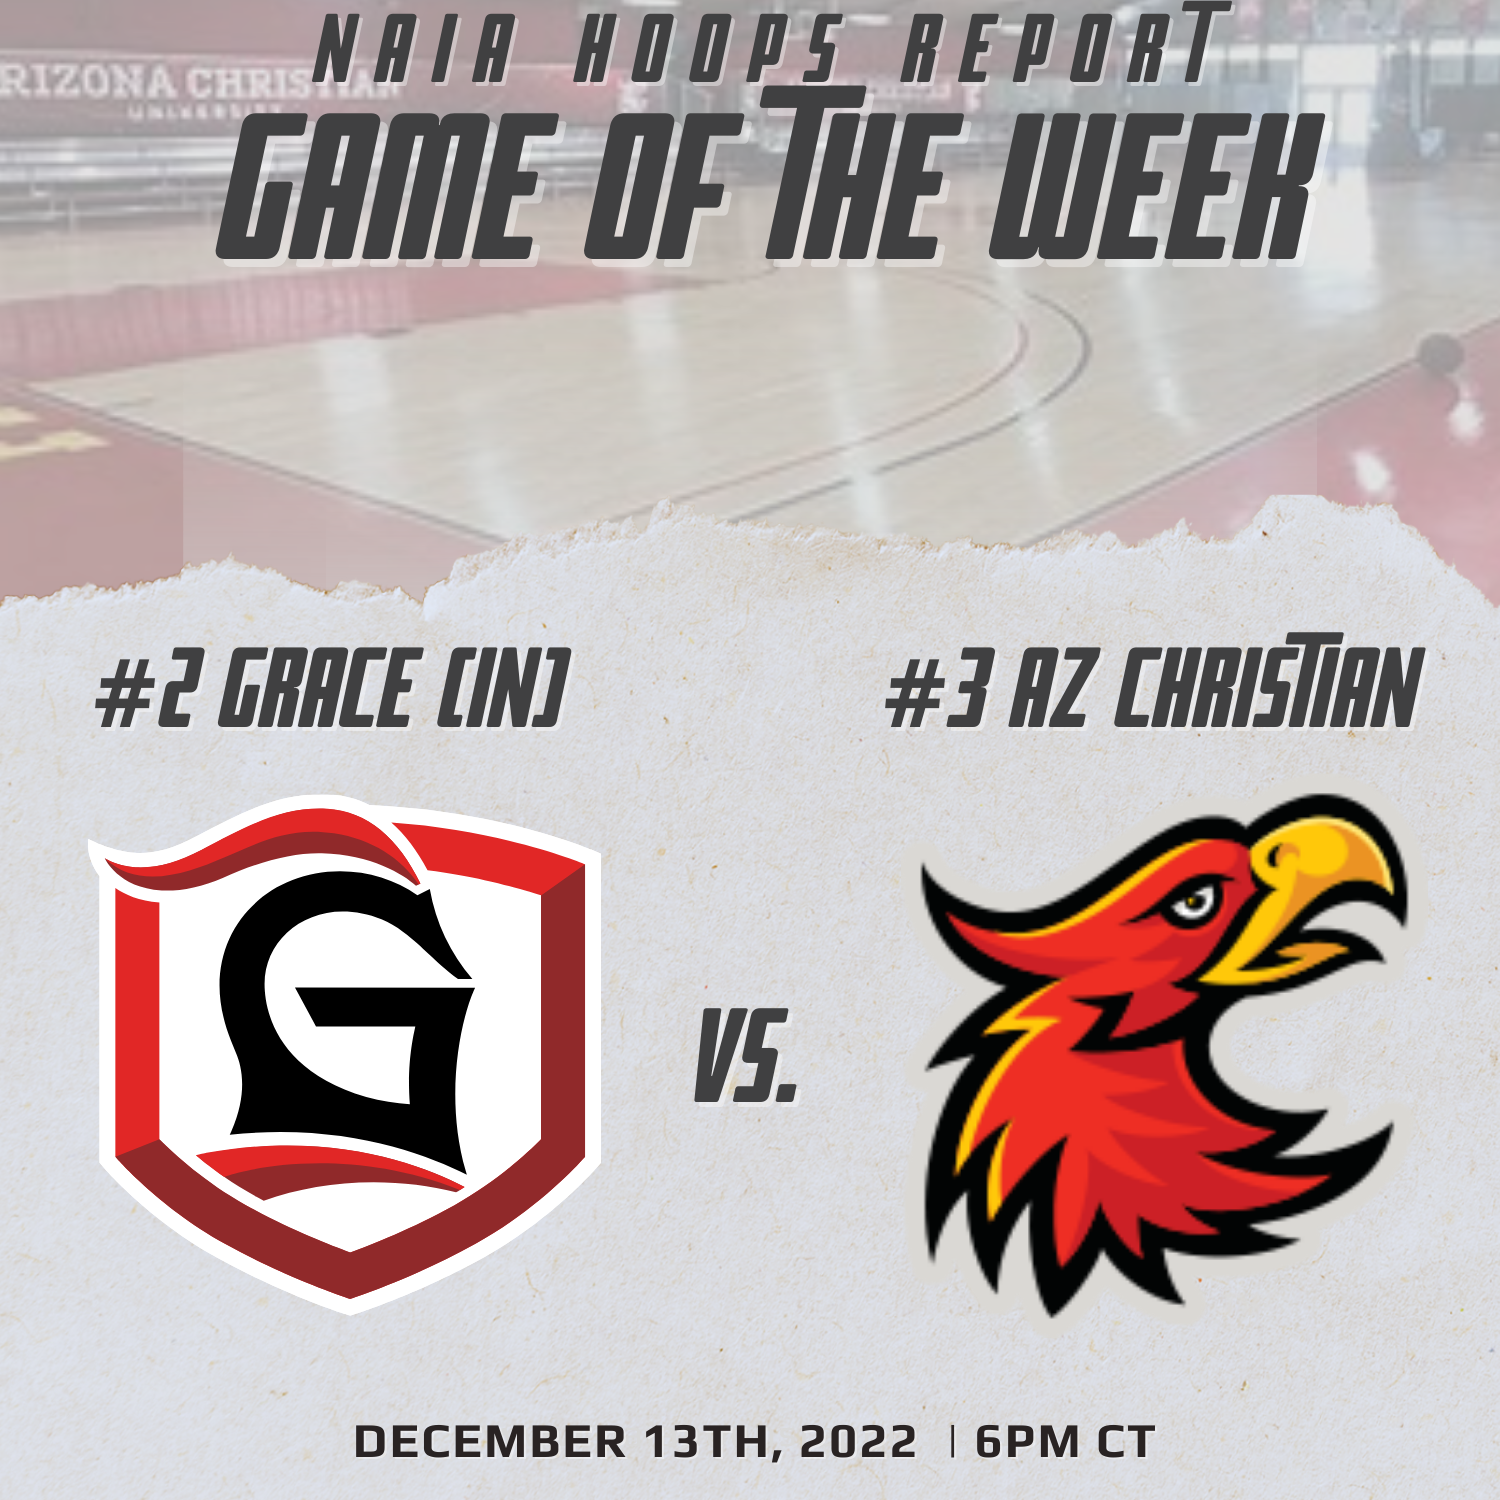 NAIA Hoops Report Game of the Week: No. 2 Grace (IN) @ No. 3 Arizona Christian